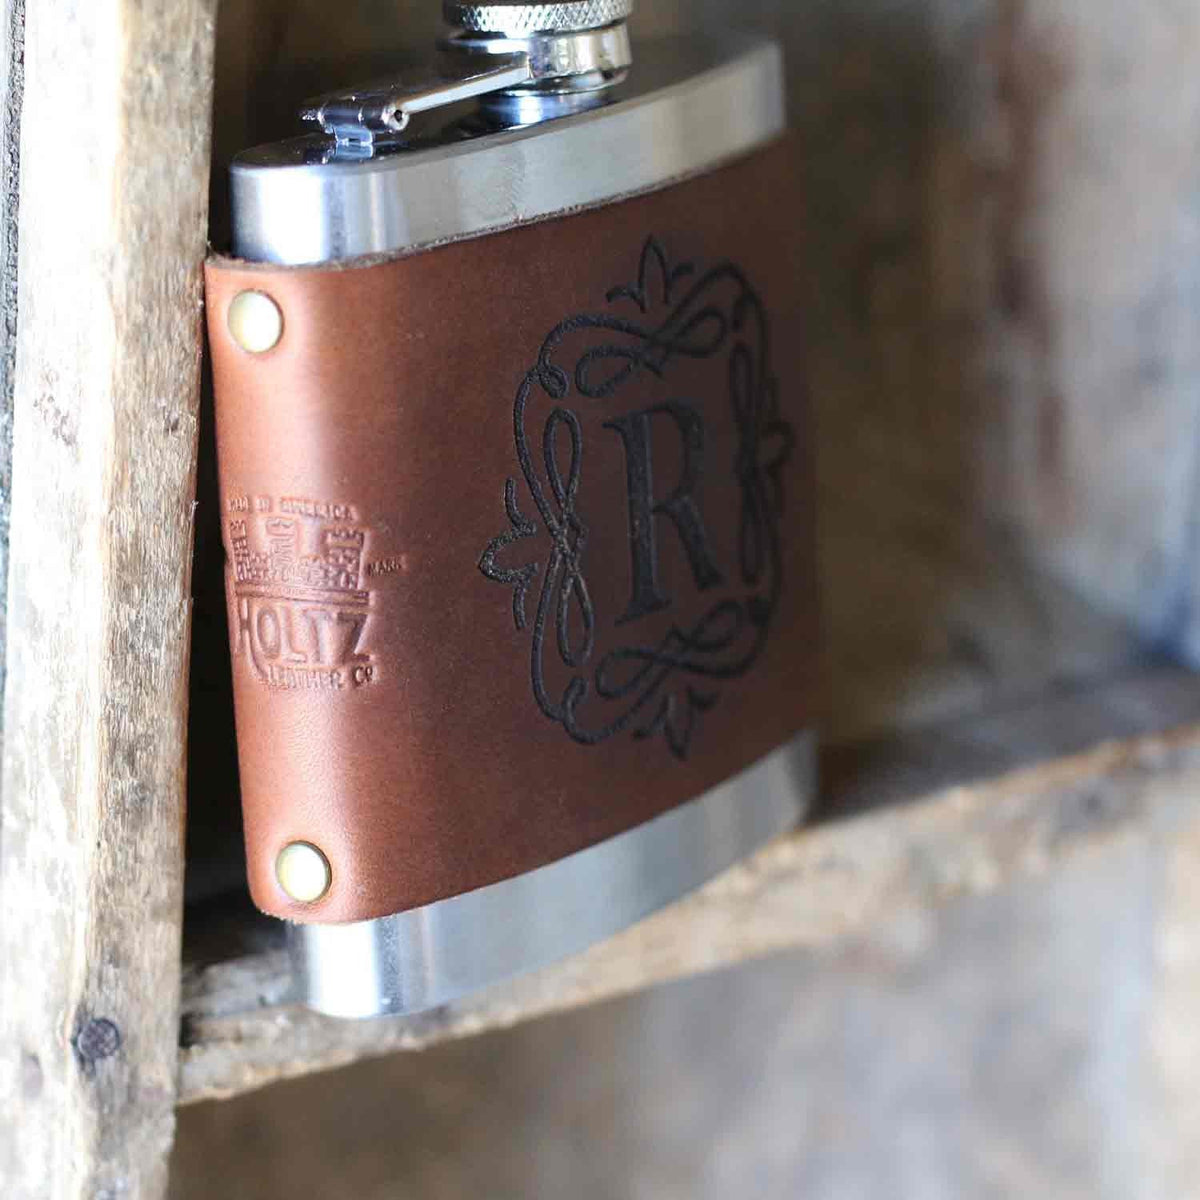 The Lucky Leather Flask Unique Personalized Groomsmen Gift